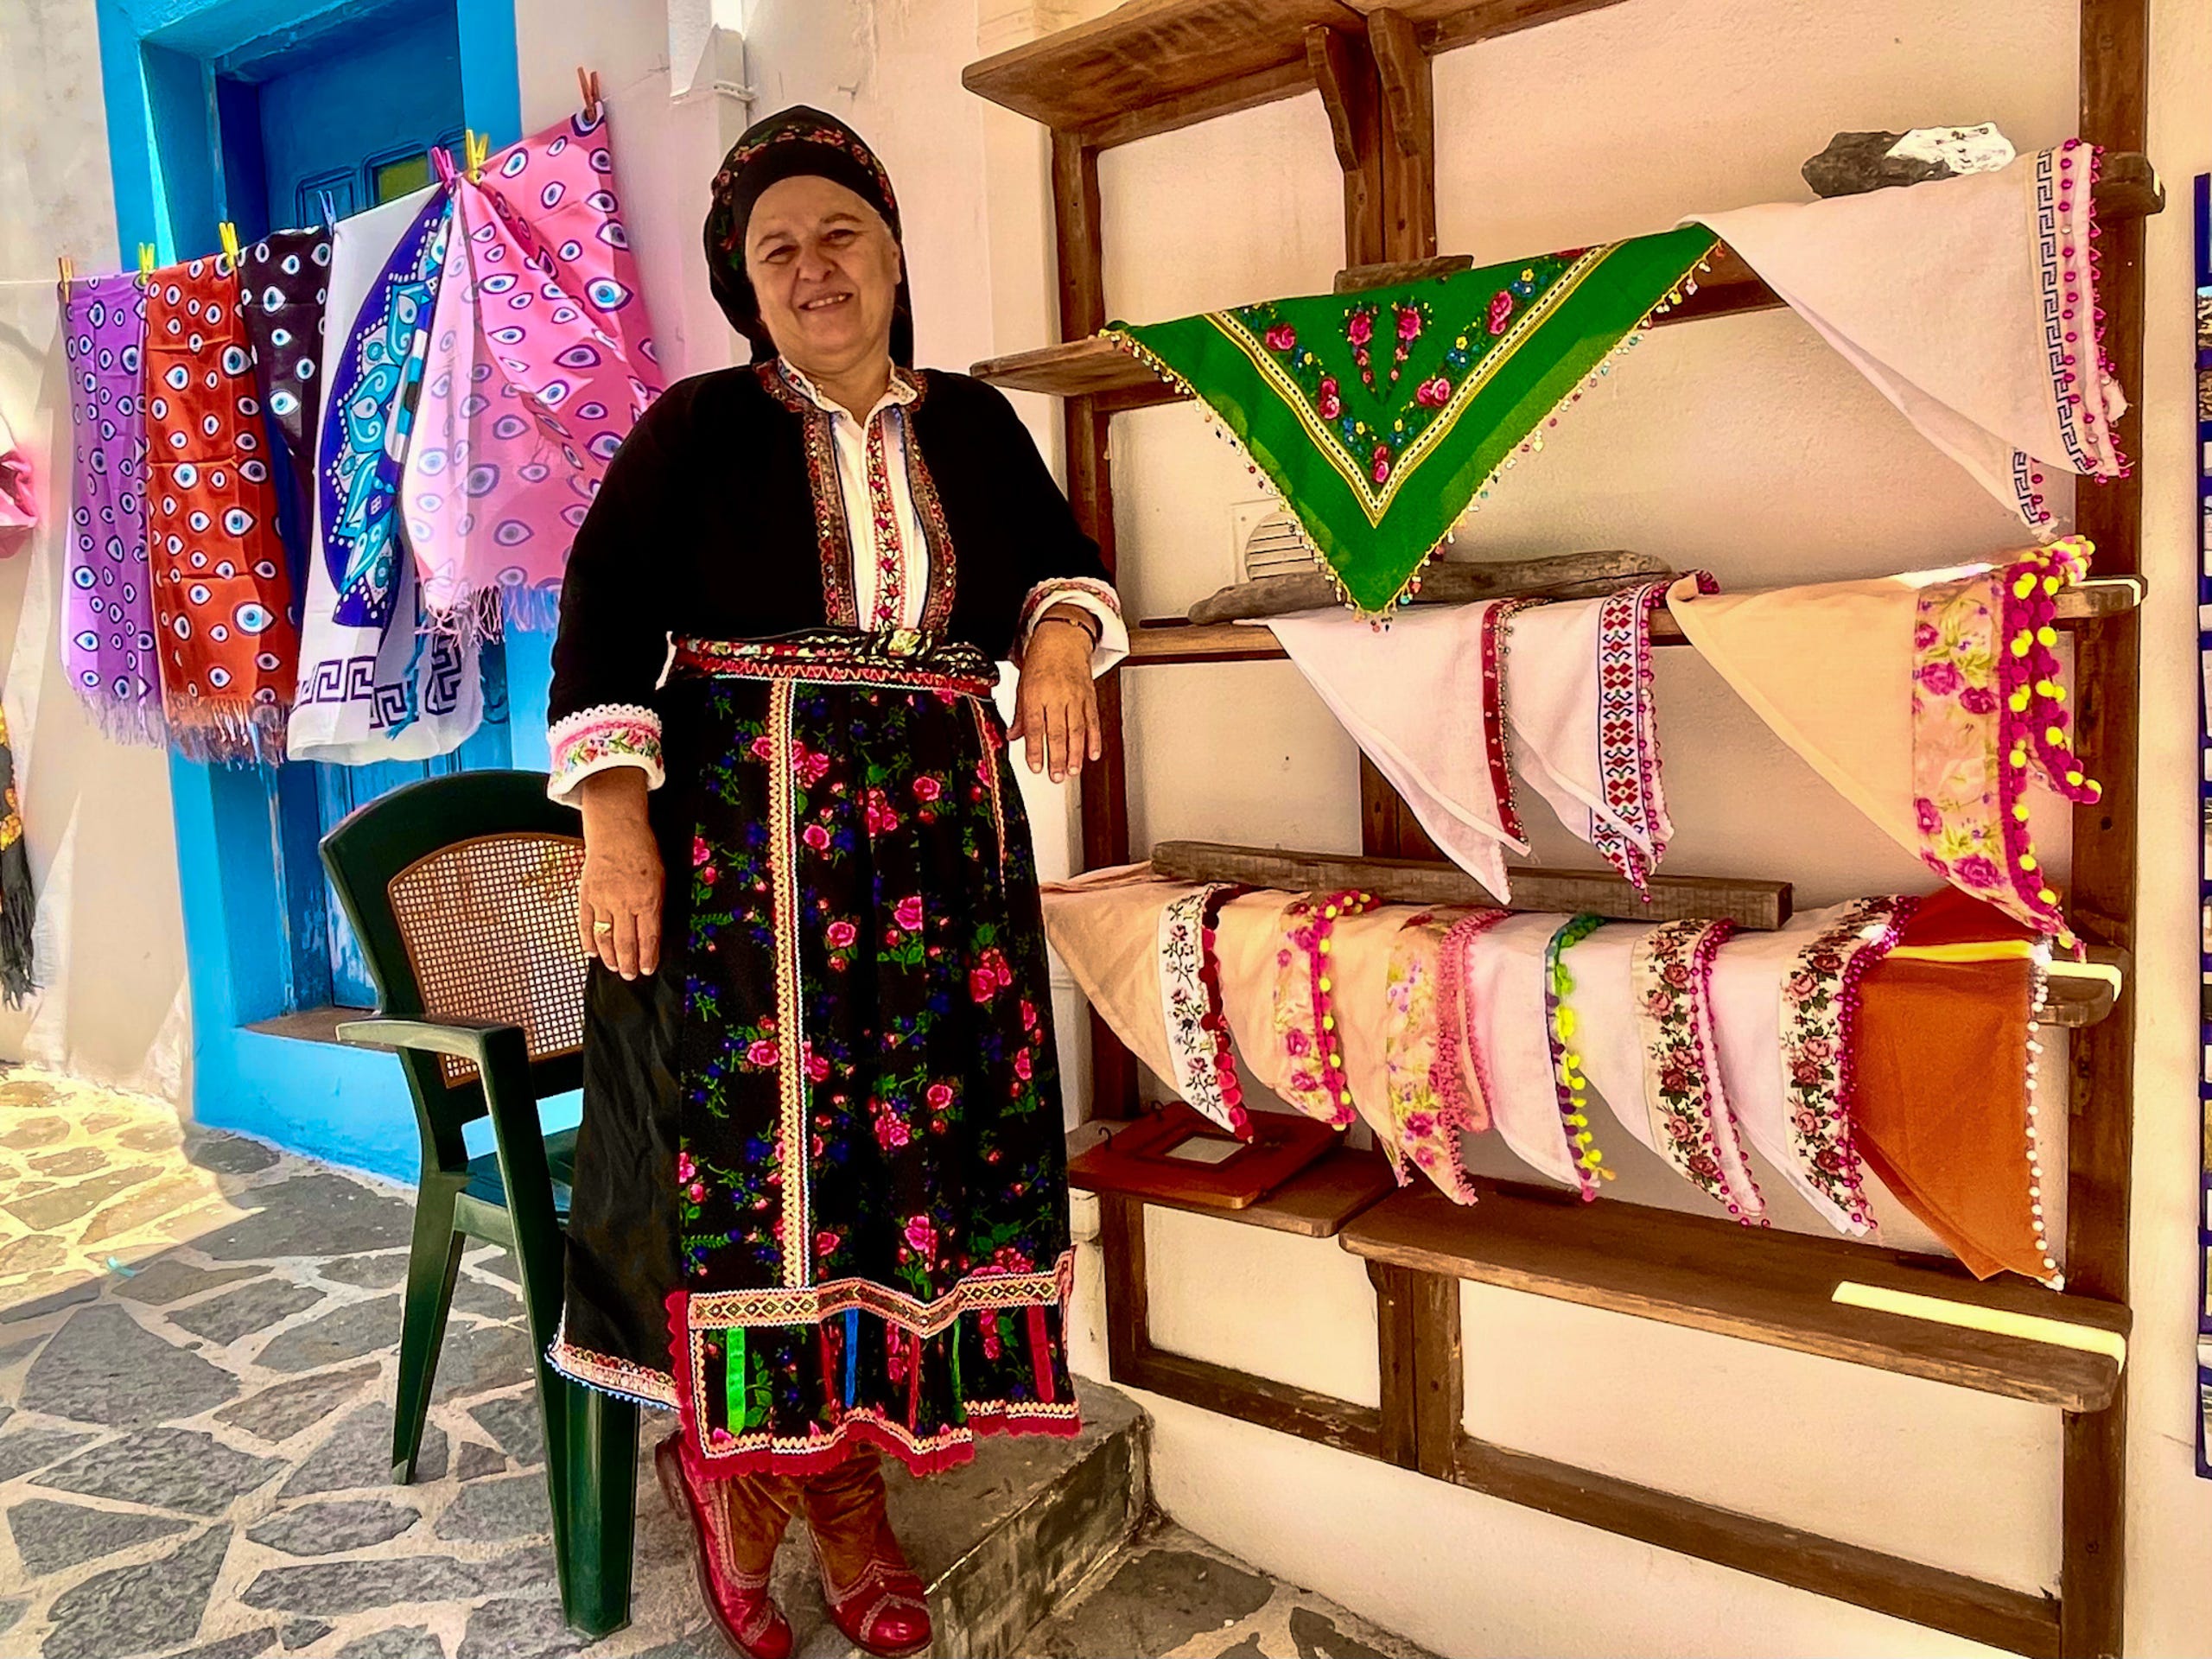 In Karpathos' time-forgotten villages perched far-reaching in cloud-covered mountains, original island traditions maintained through rich folklore and gallantry prevail today. Older women wear distinguished embroidered dresses symbolizing their bravery and pride as matriarchs and caretakers of the village and families.